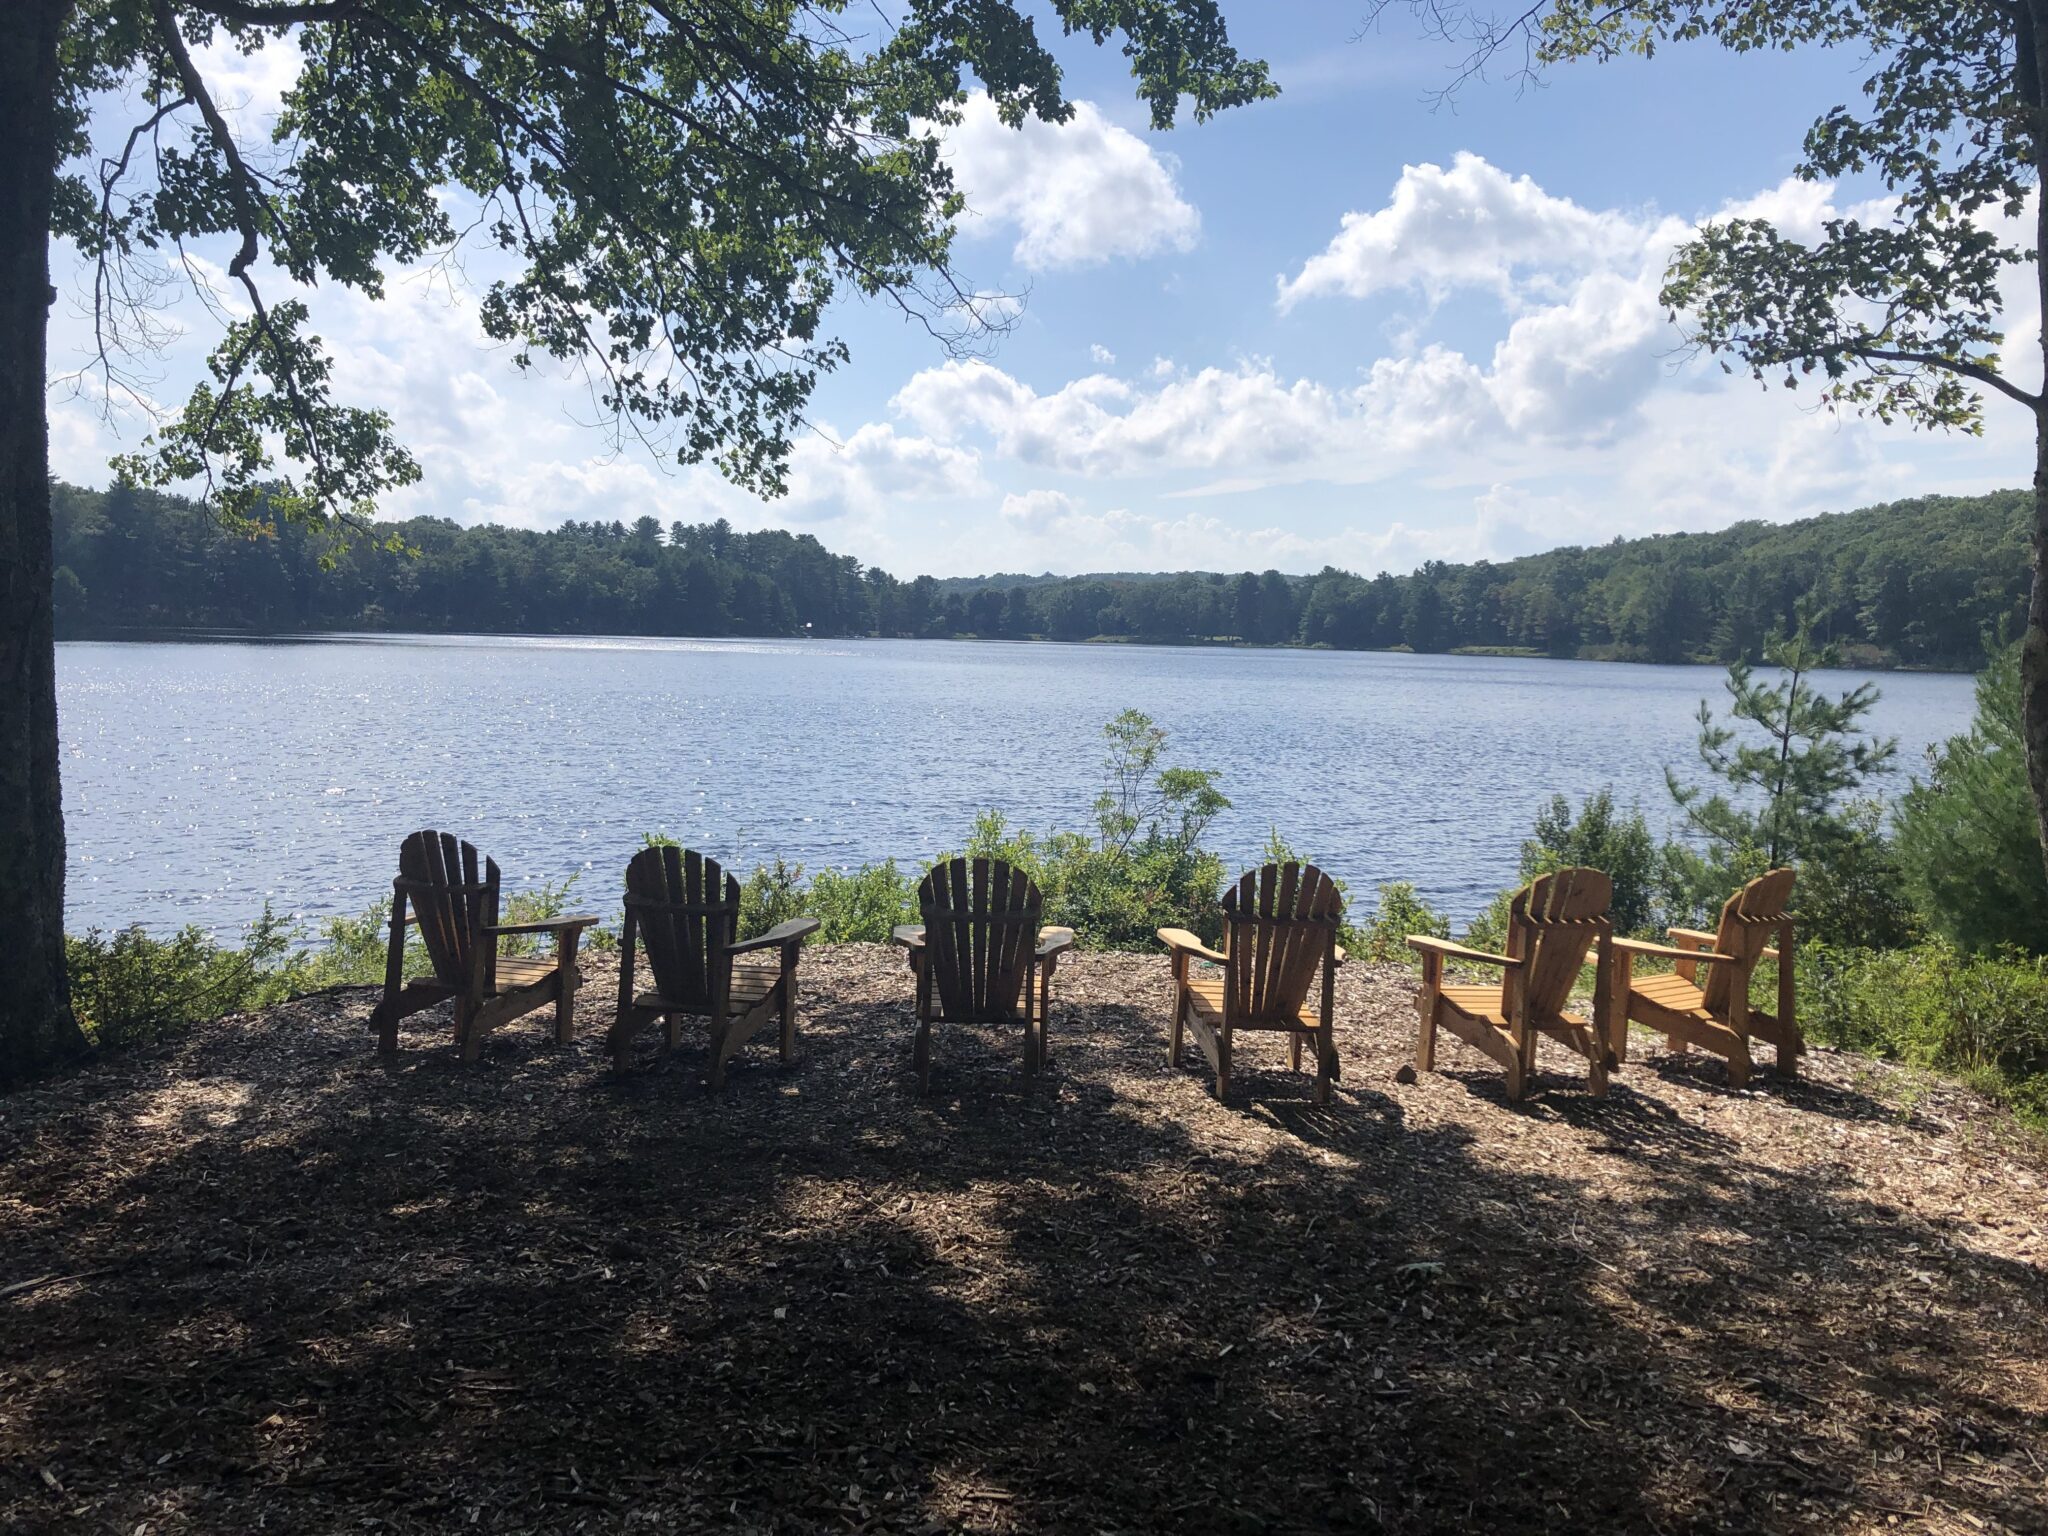 Wooden seats overlooking a lake